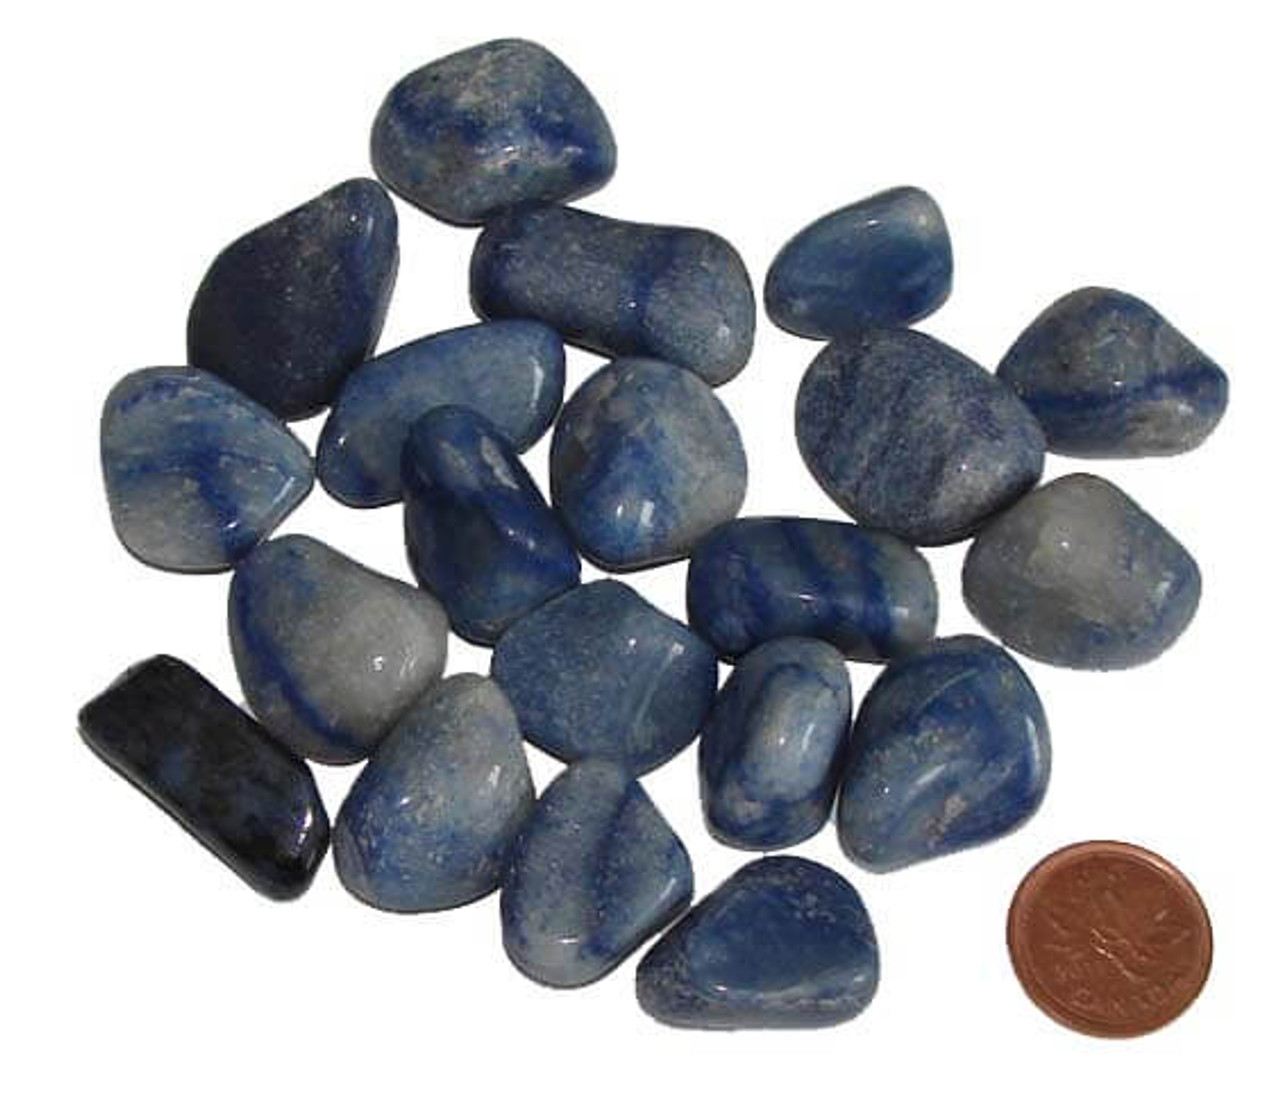 Where to Buy Tumbled Dumortierite - Meaning of Stones